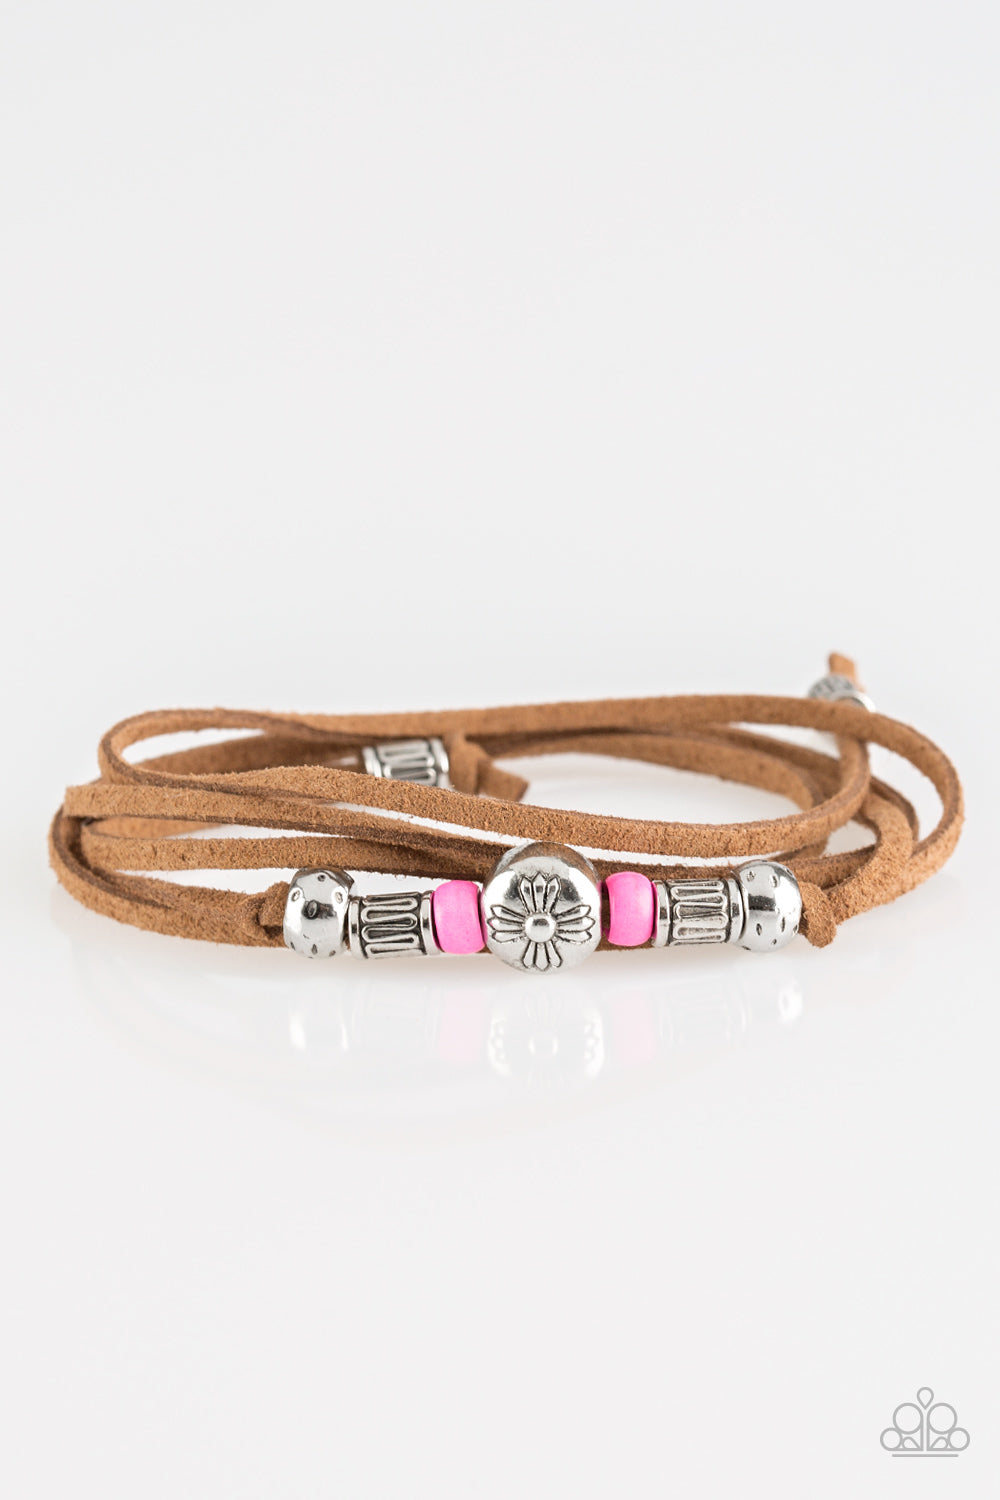 FIND YOUR WAY - PINK BEADS LEATHER WRAP AROUND SUEDE BRACELET